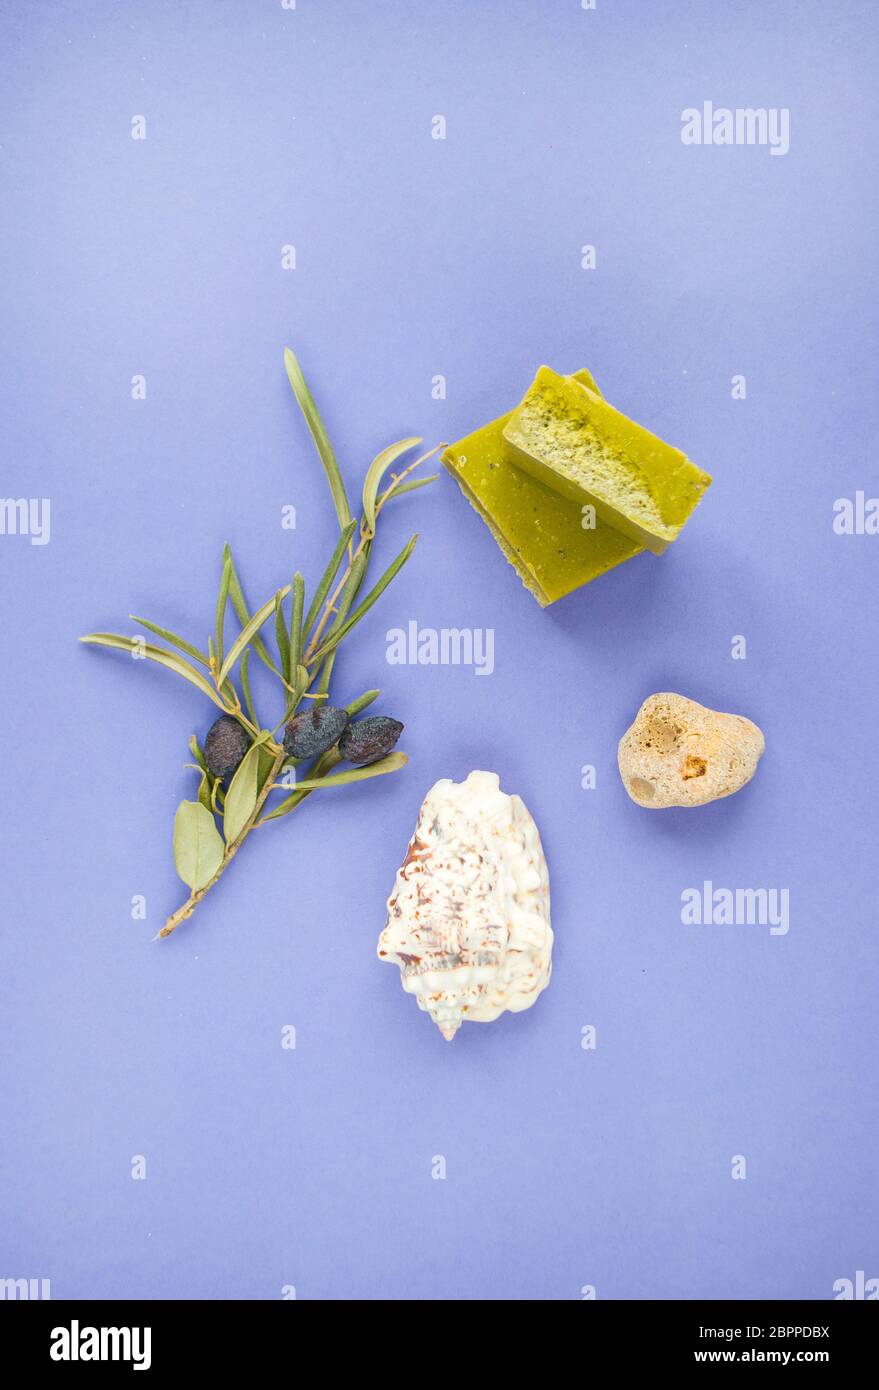 Flat lay of an olive branch, handmade olive soap bars and sea shells on purple background. Stock Photo